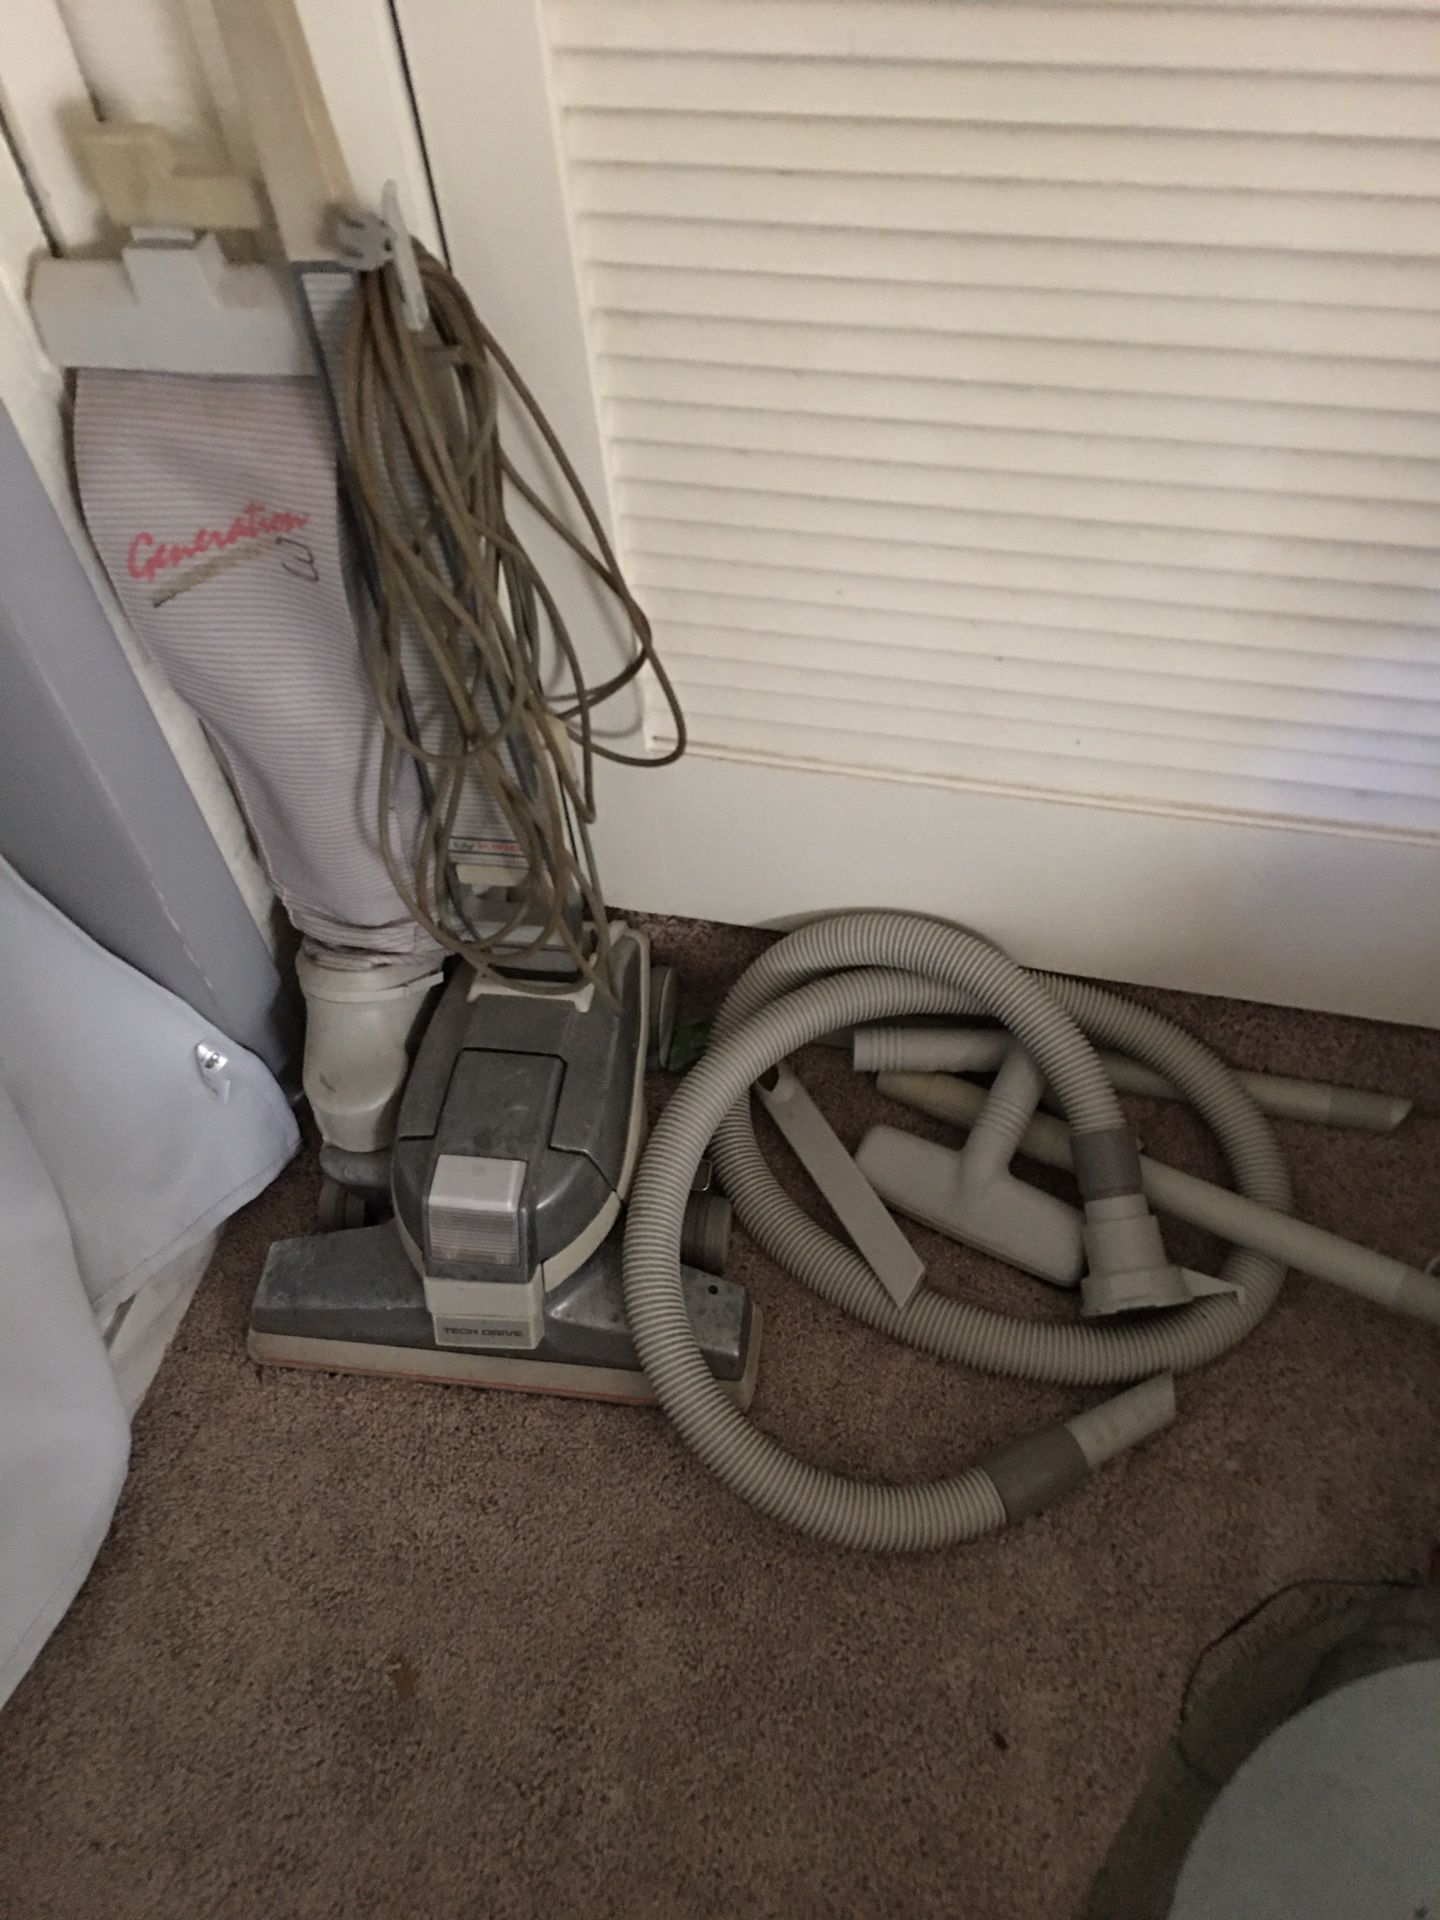 Kirby vacuum cleaner/carpet cleaner with manual and all accessory’s!